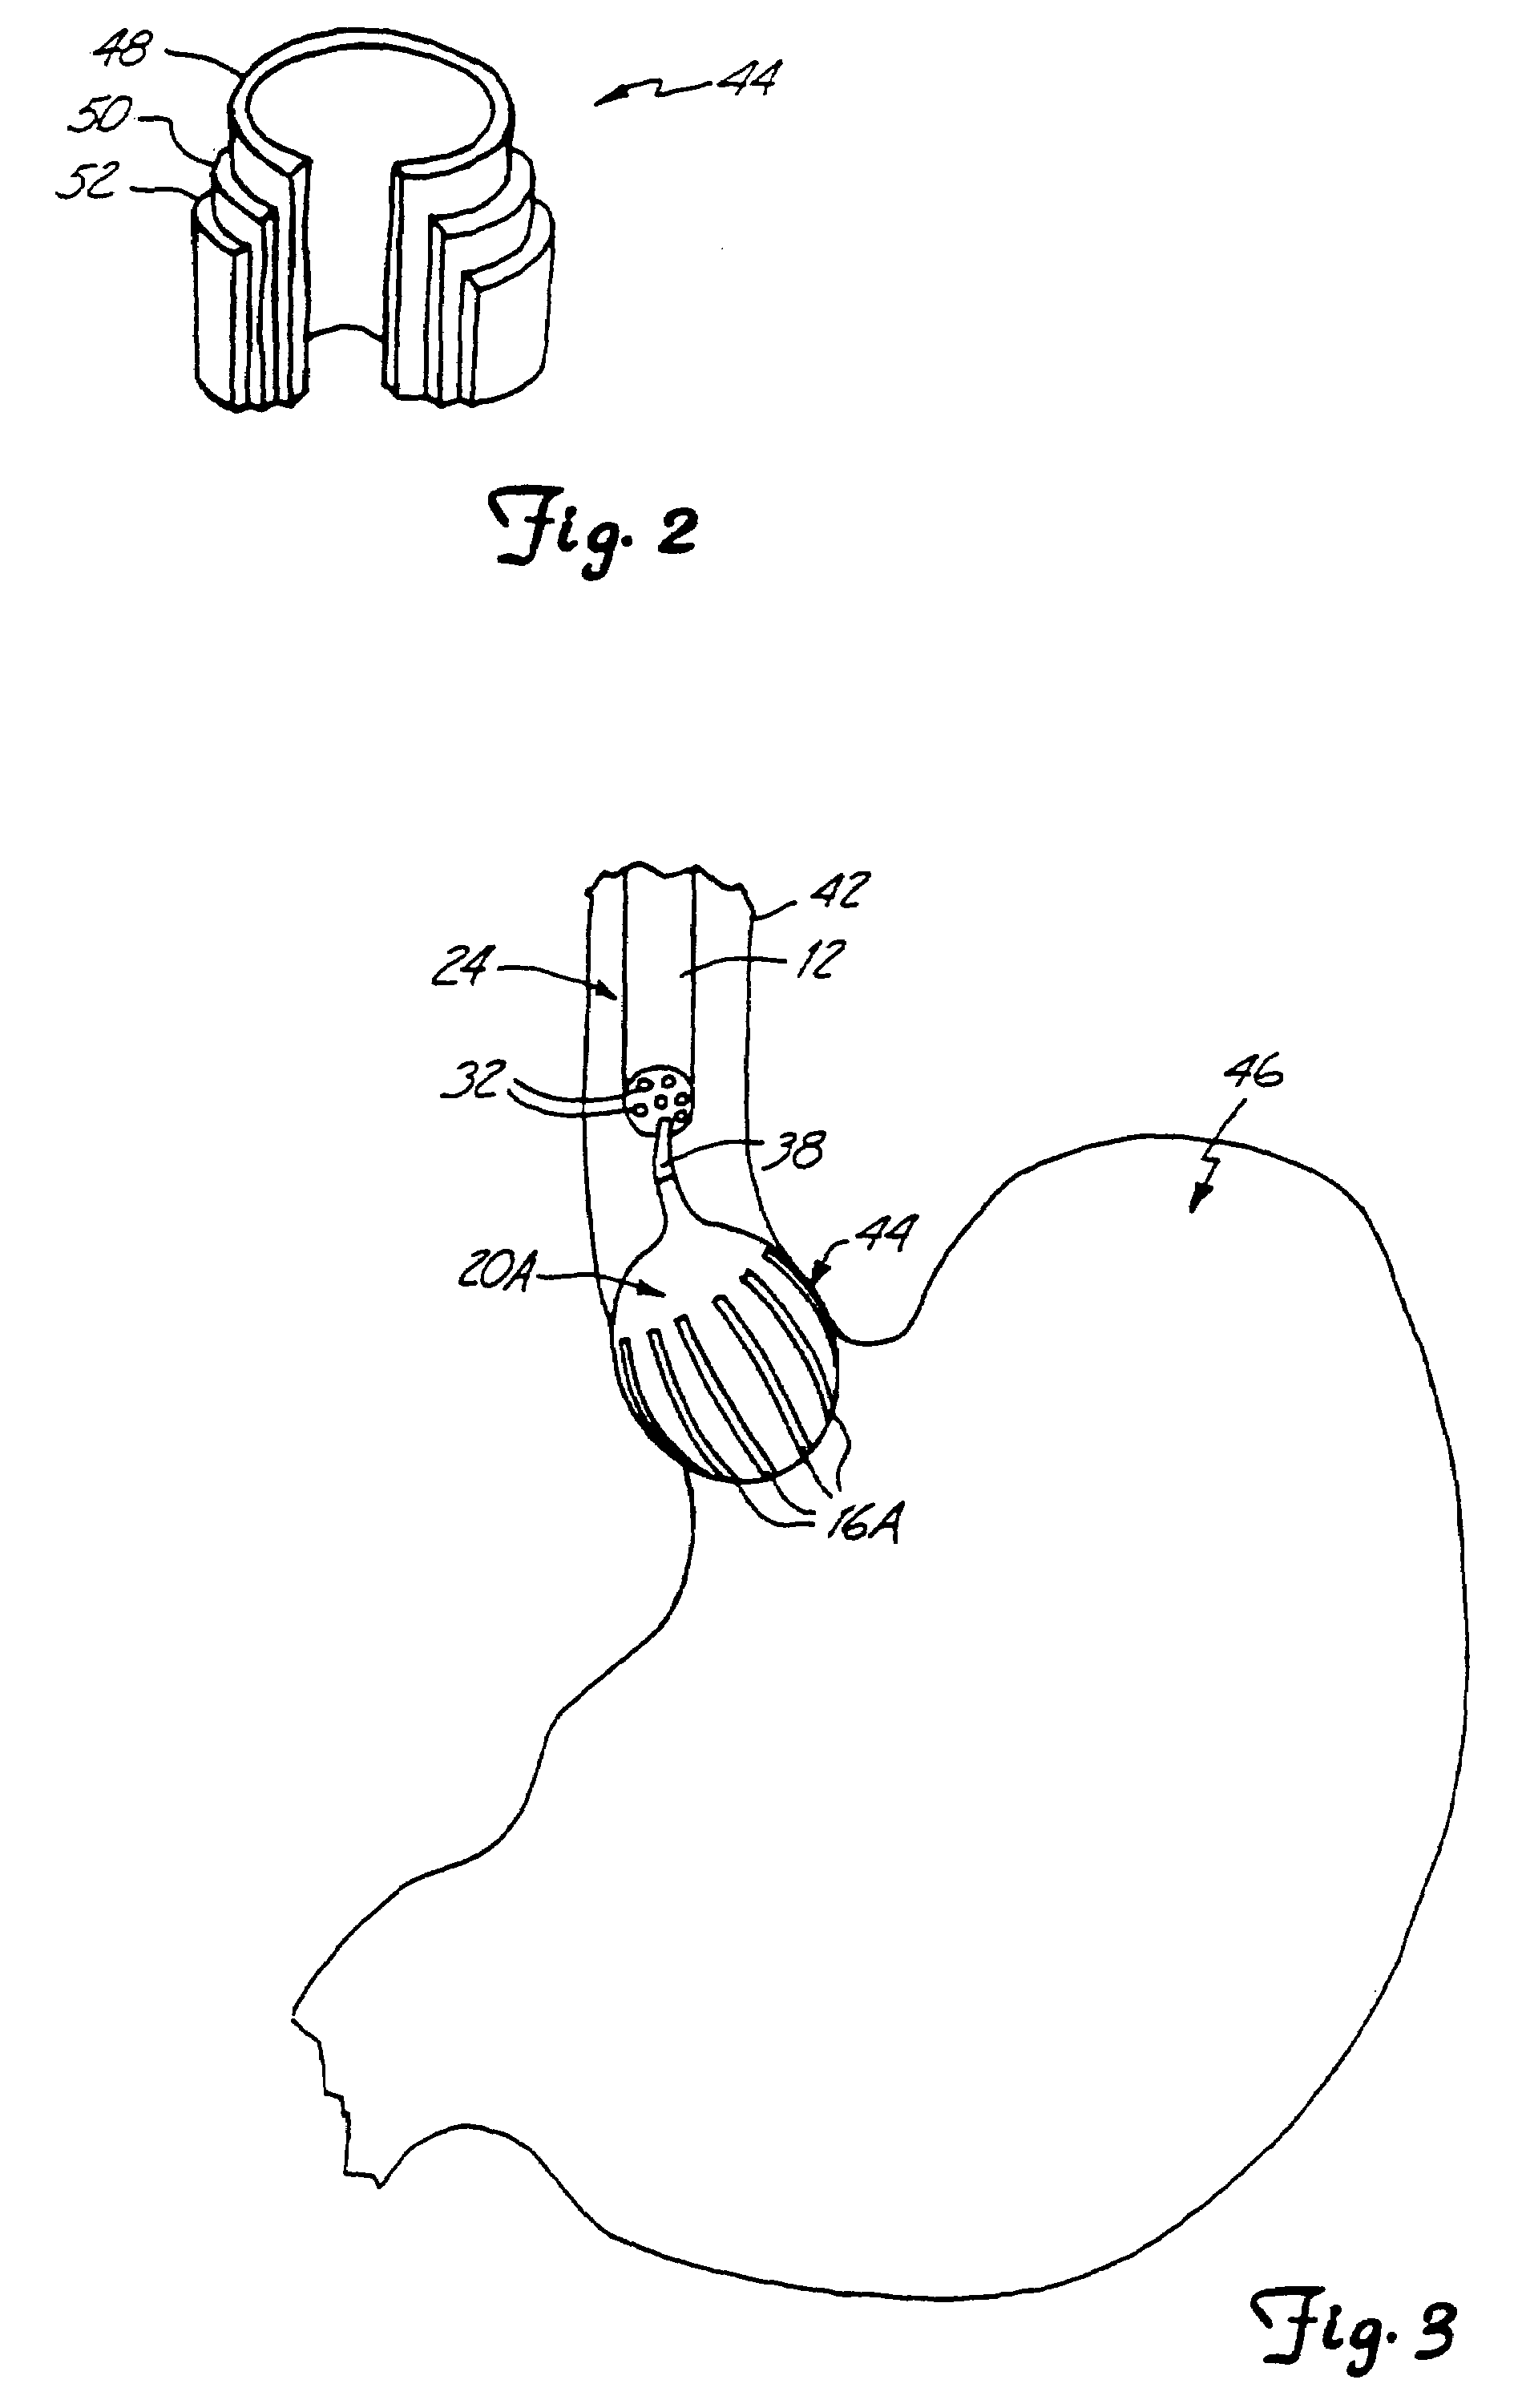 Device and method for treatment of gastroesophageal reflux disease